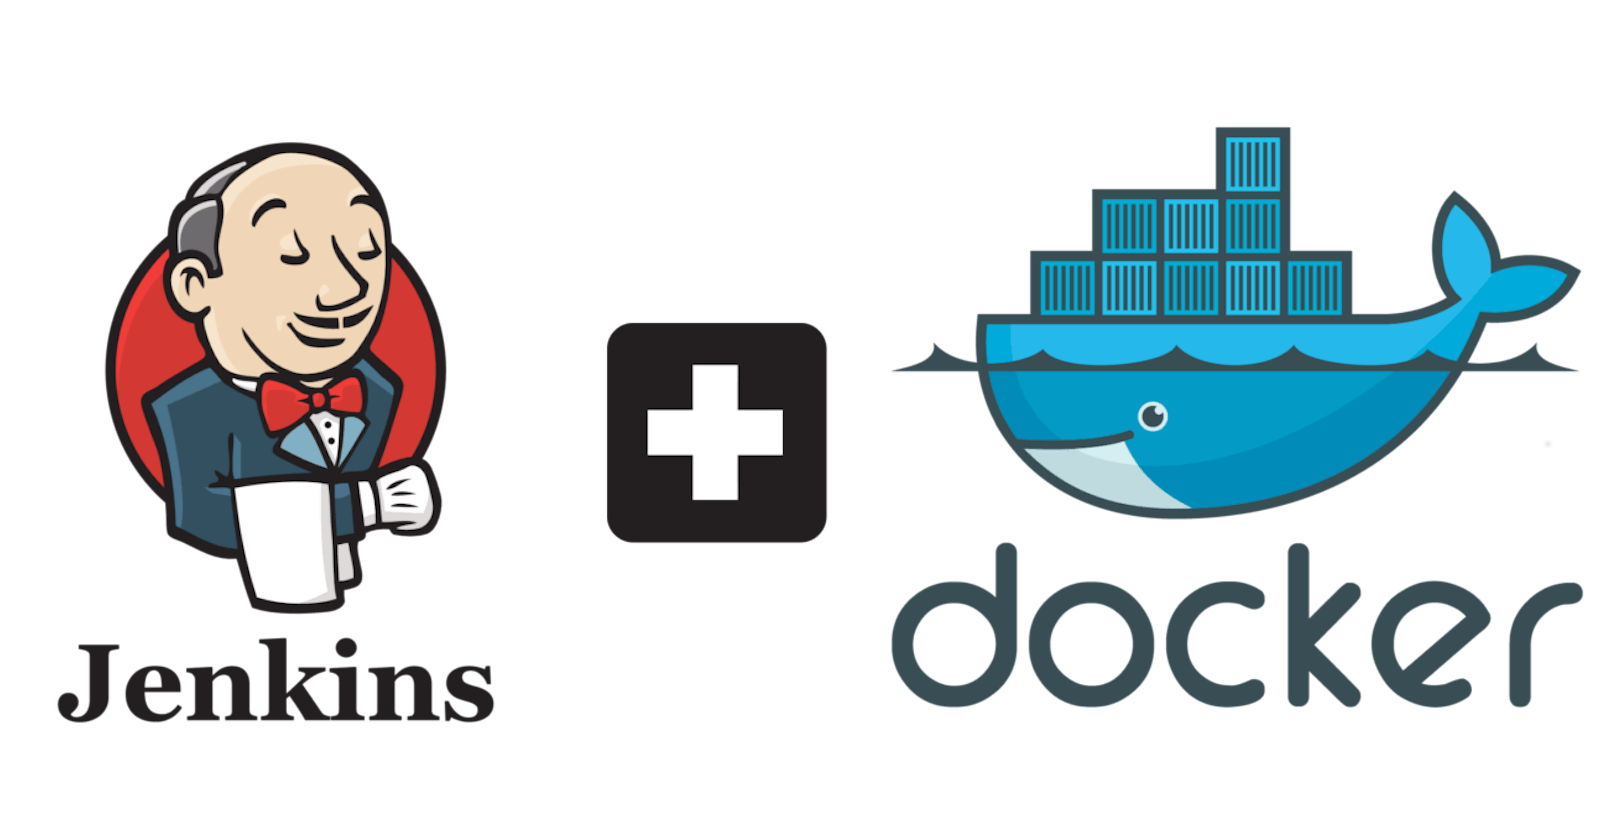 Jenkins job for installing docker and launch the container automatically with aws ec2 instance